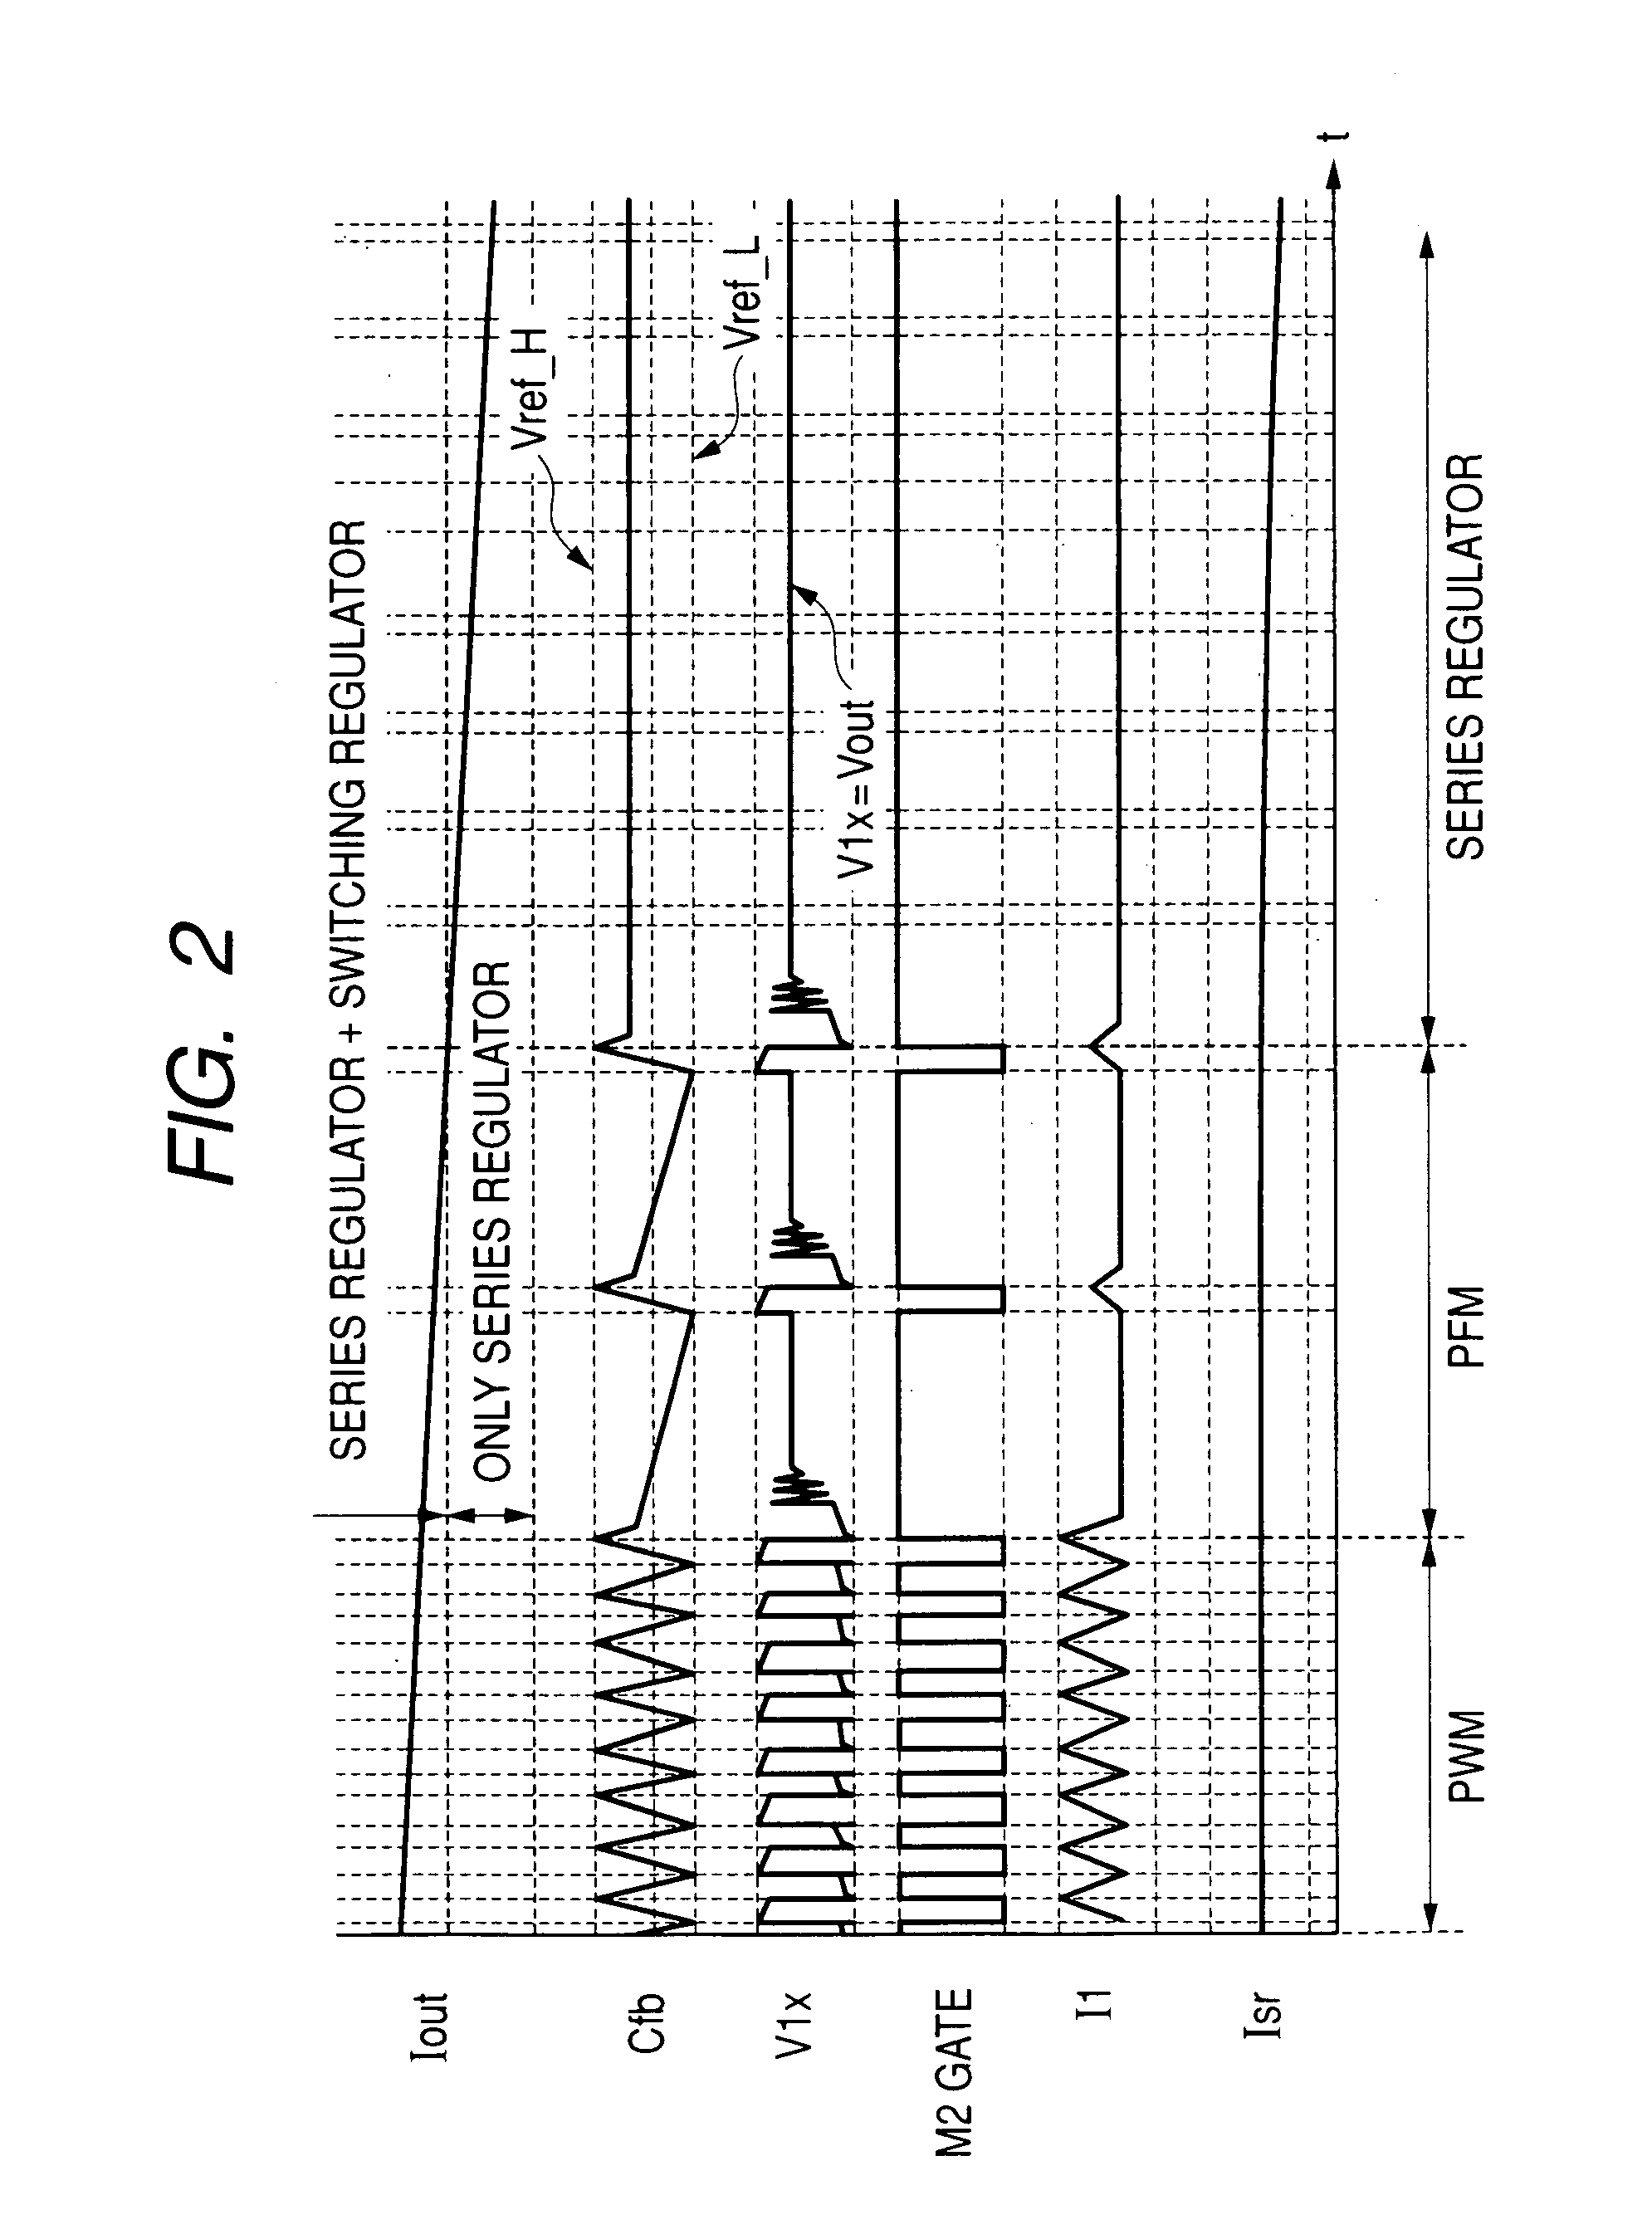 Switching power supply in an integrated circuit having a comparator with two threshold values, a synchronization input and output, voltage feedback and efficient current sensing